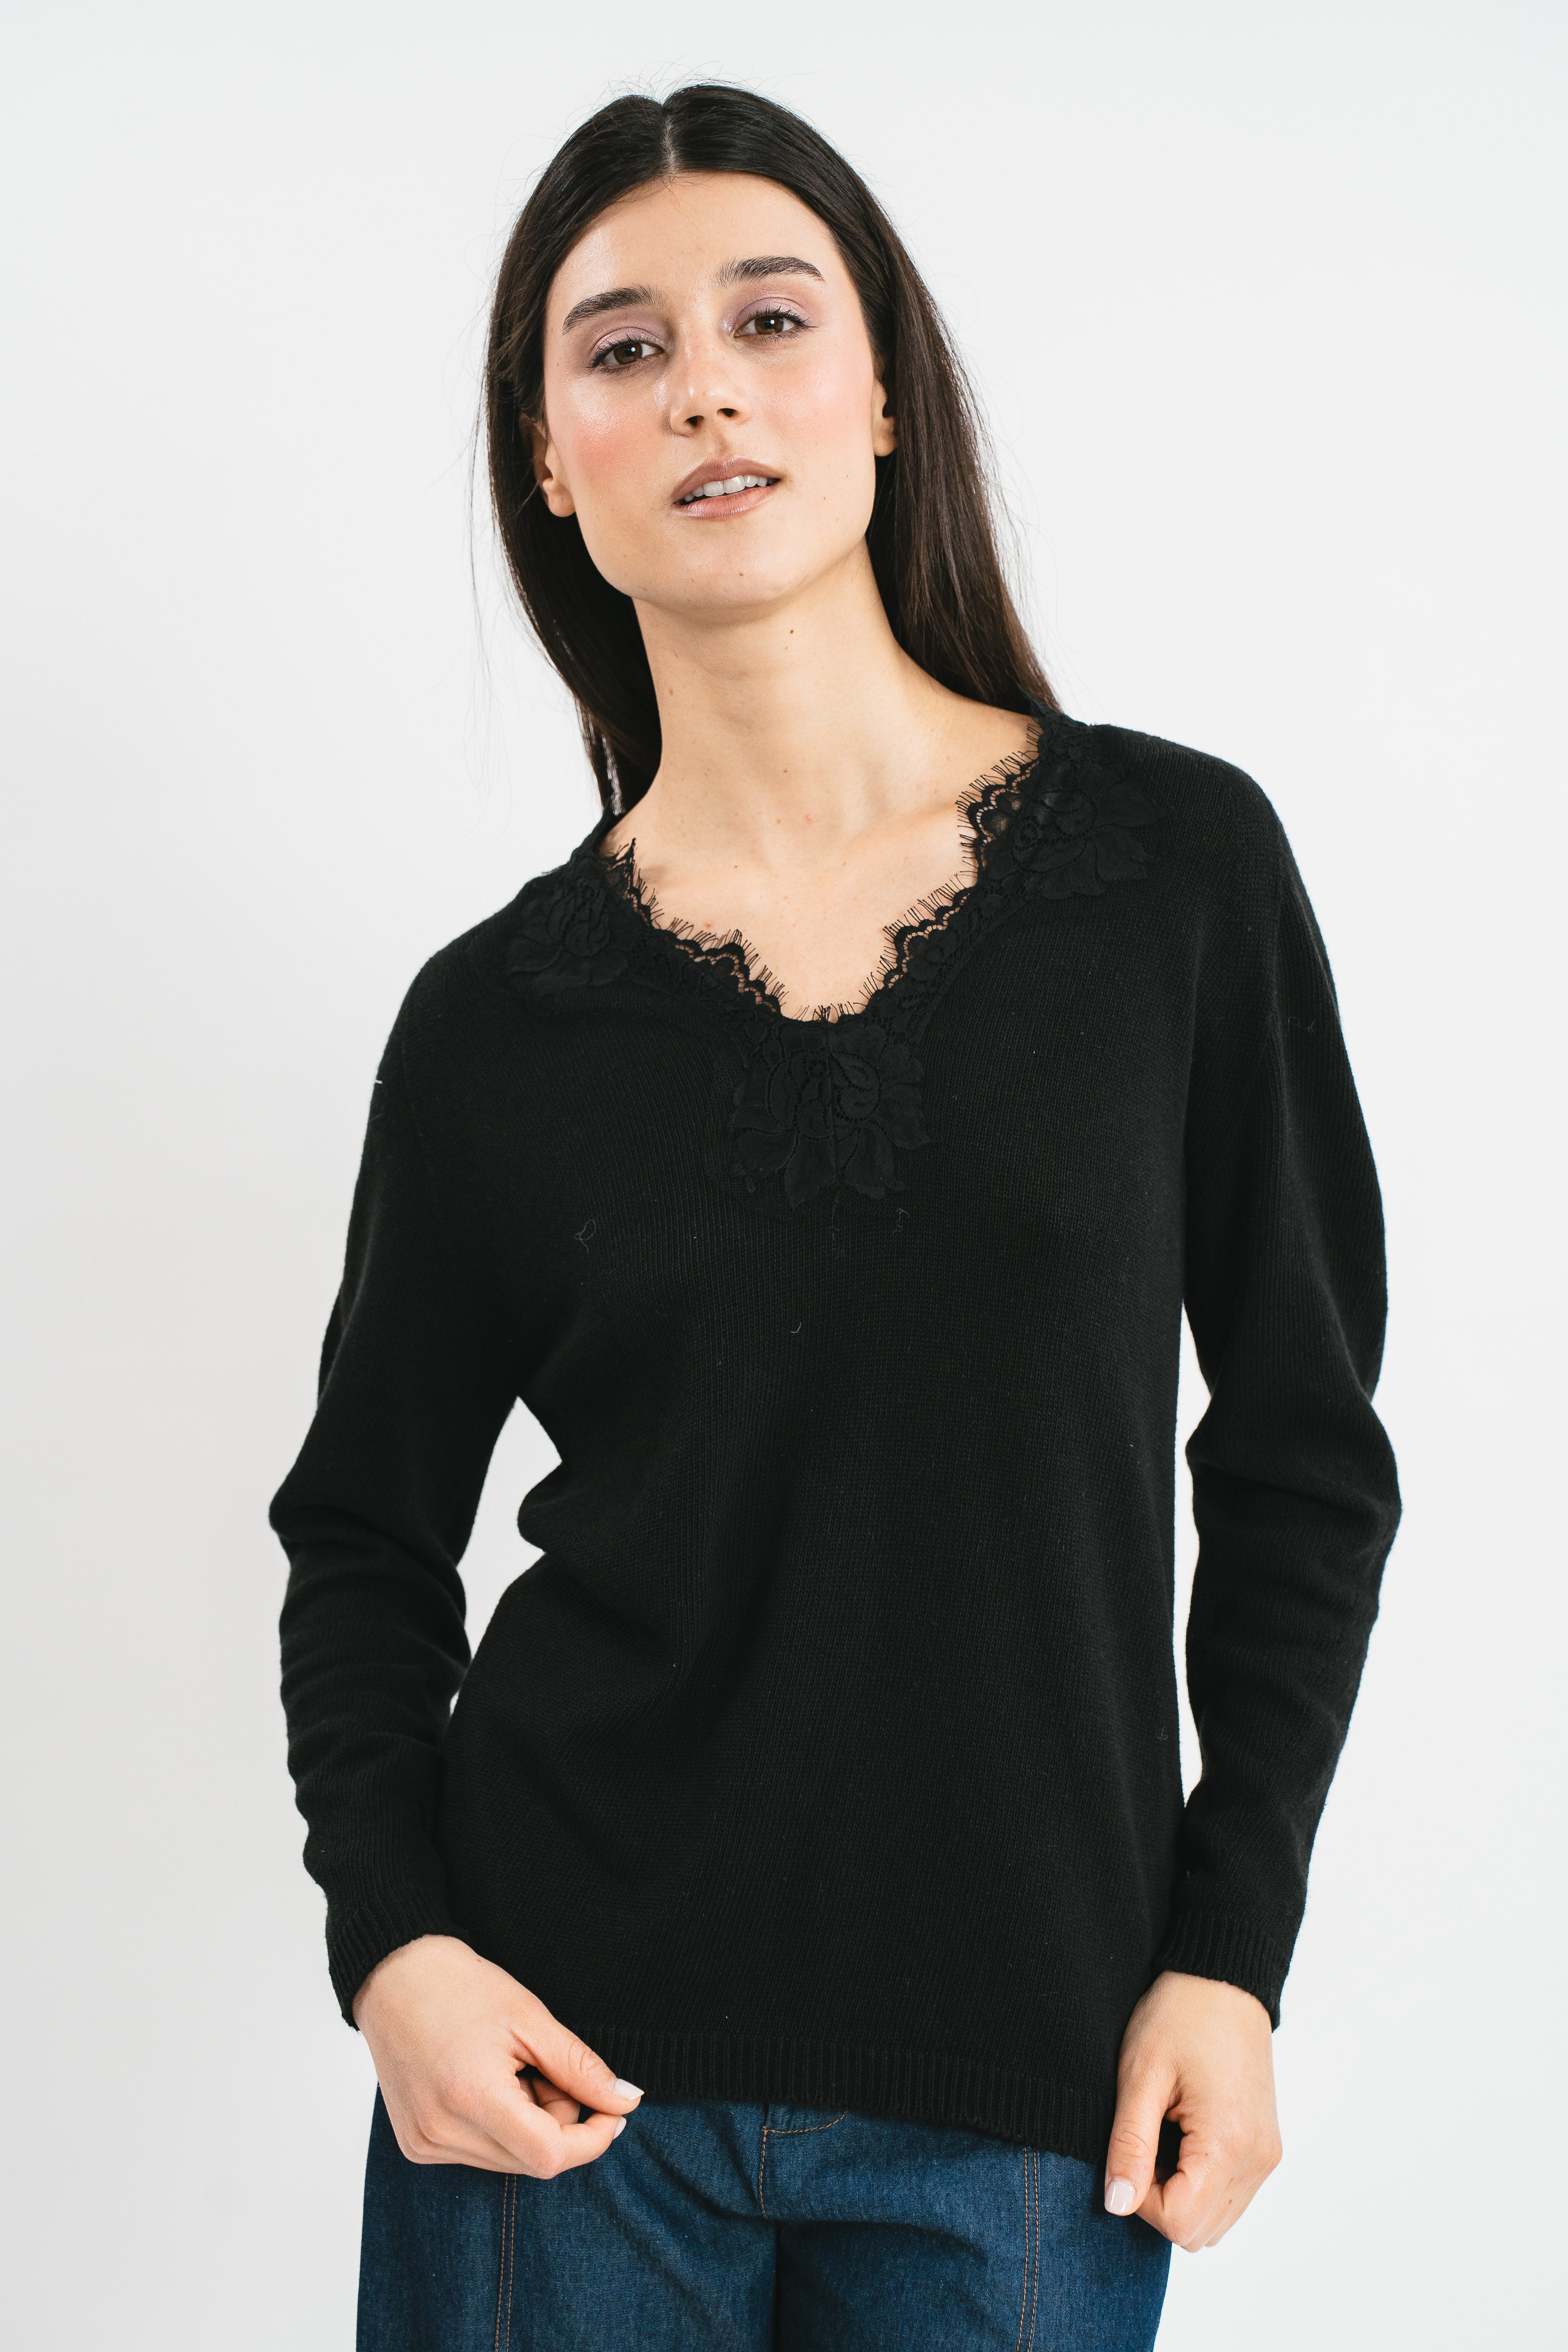 V-neck sweater with lace details